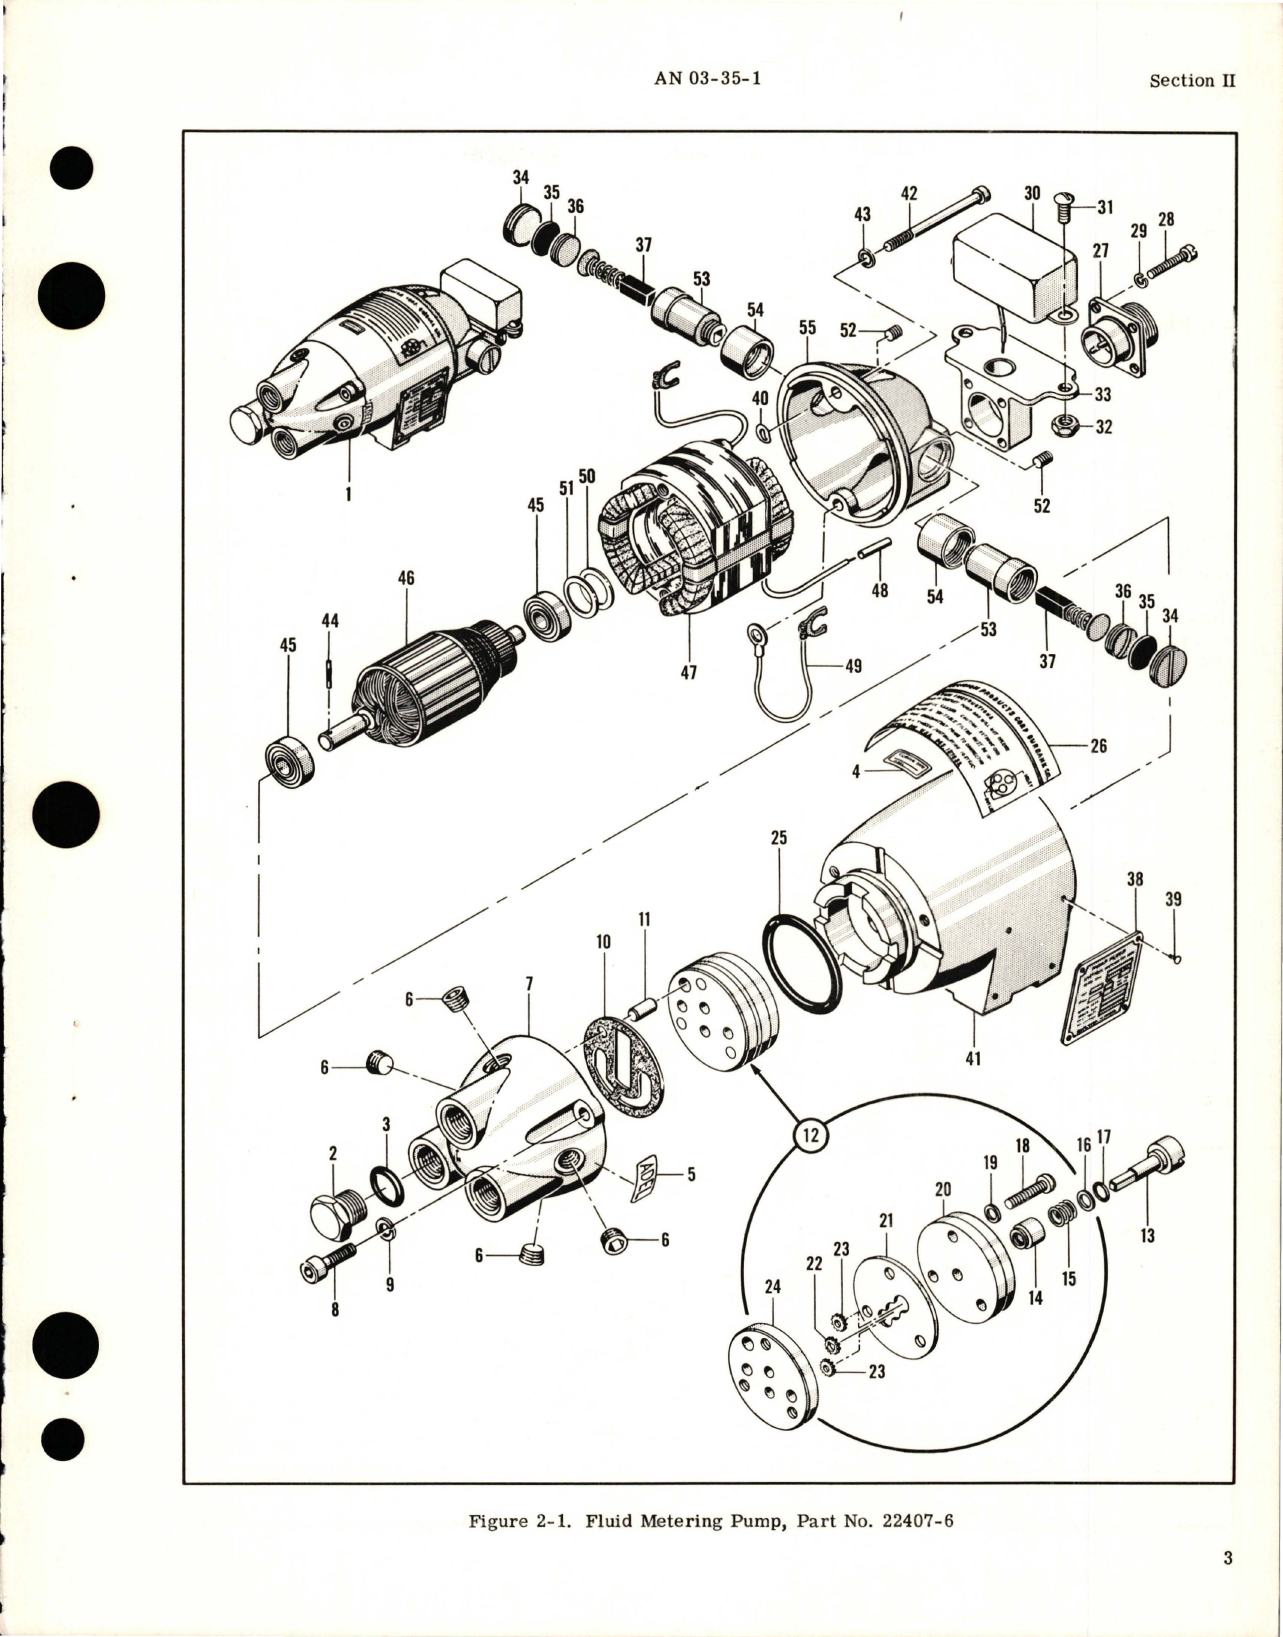 Sample page 7 from AirCorps Library document: Overhaul Instructions for Fluid Metering Pumps - Parts 22407-1, 22407-2, and 22407-6 